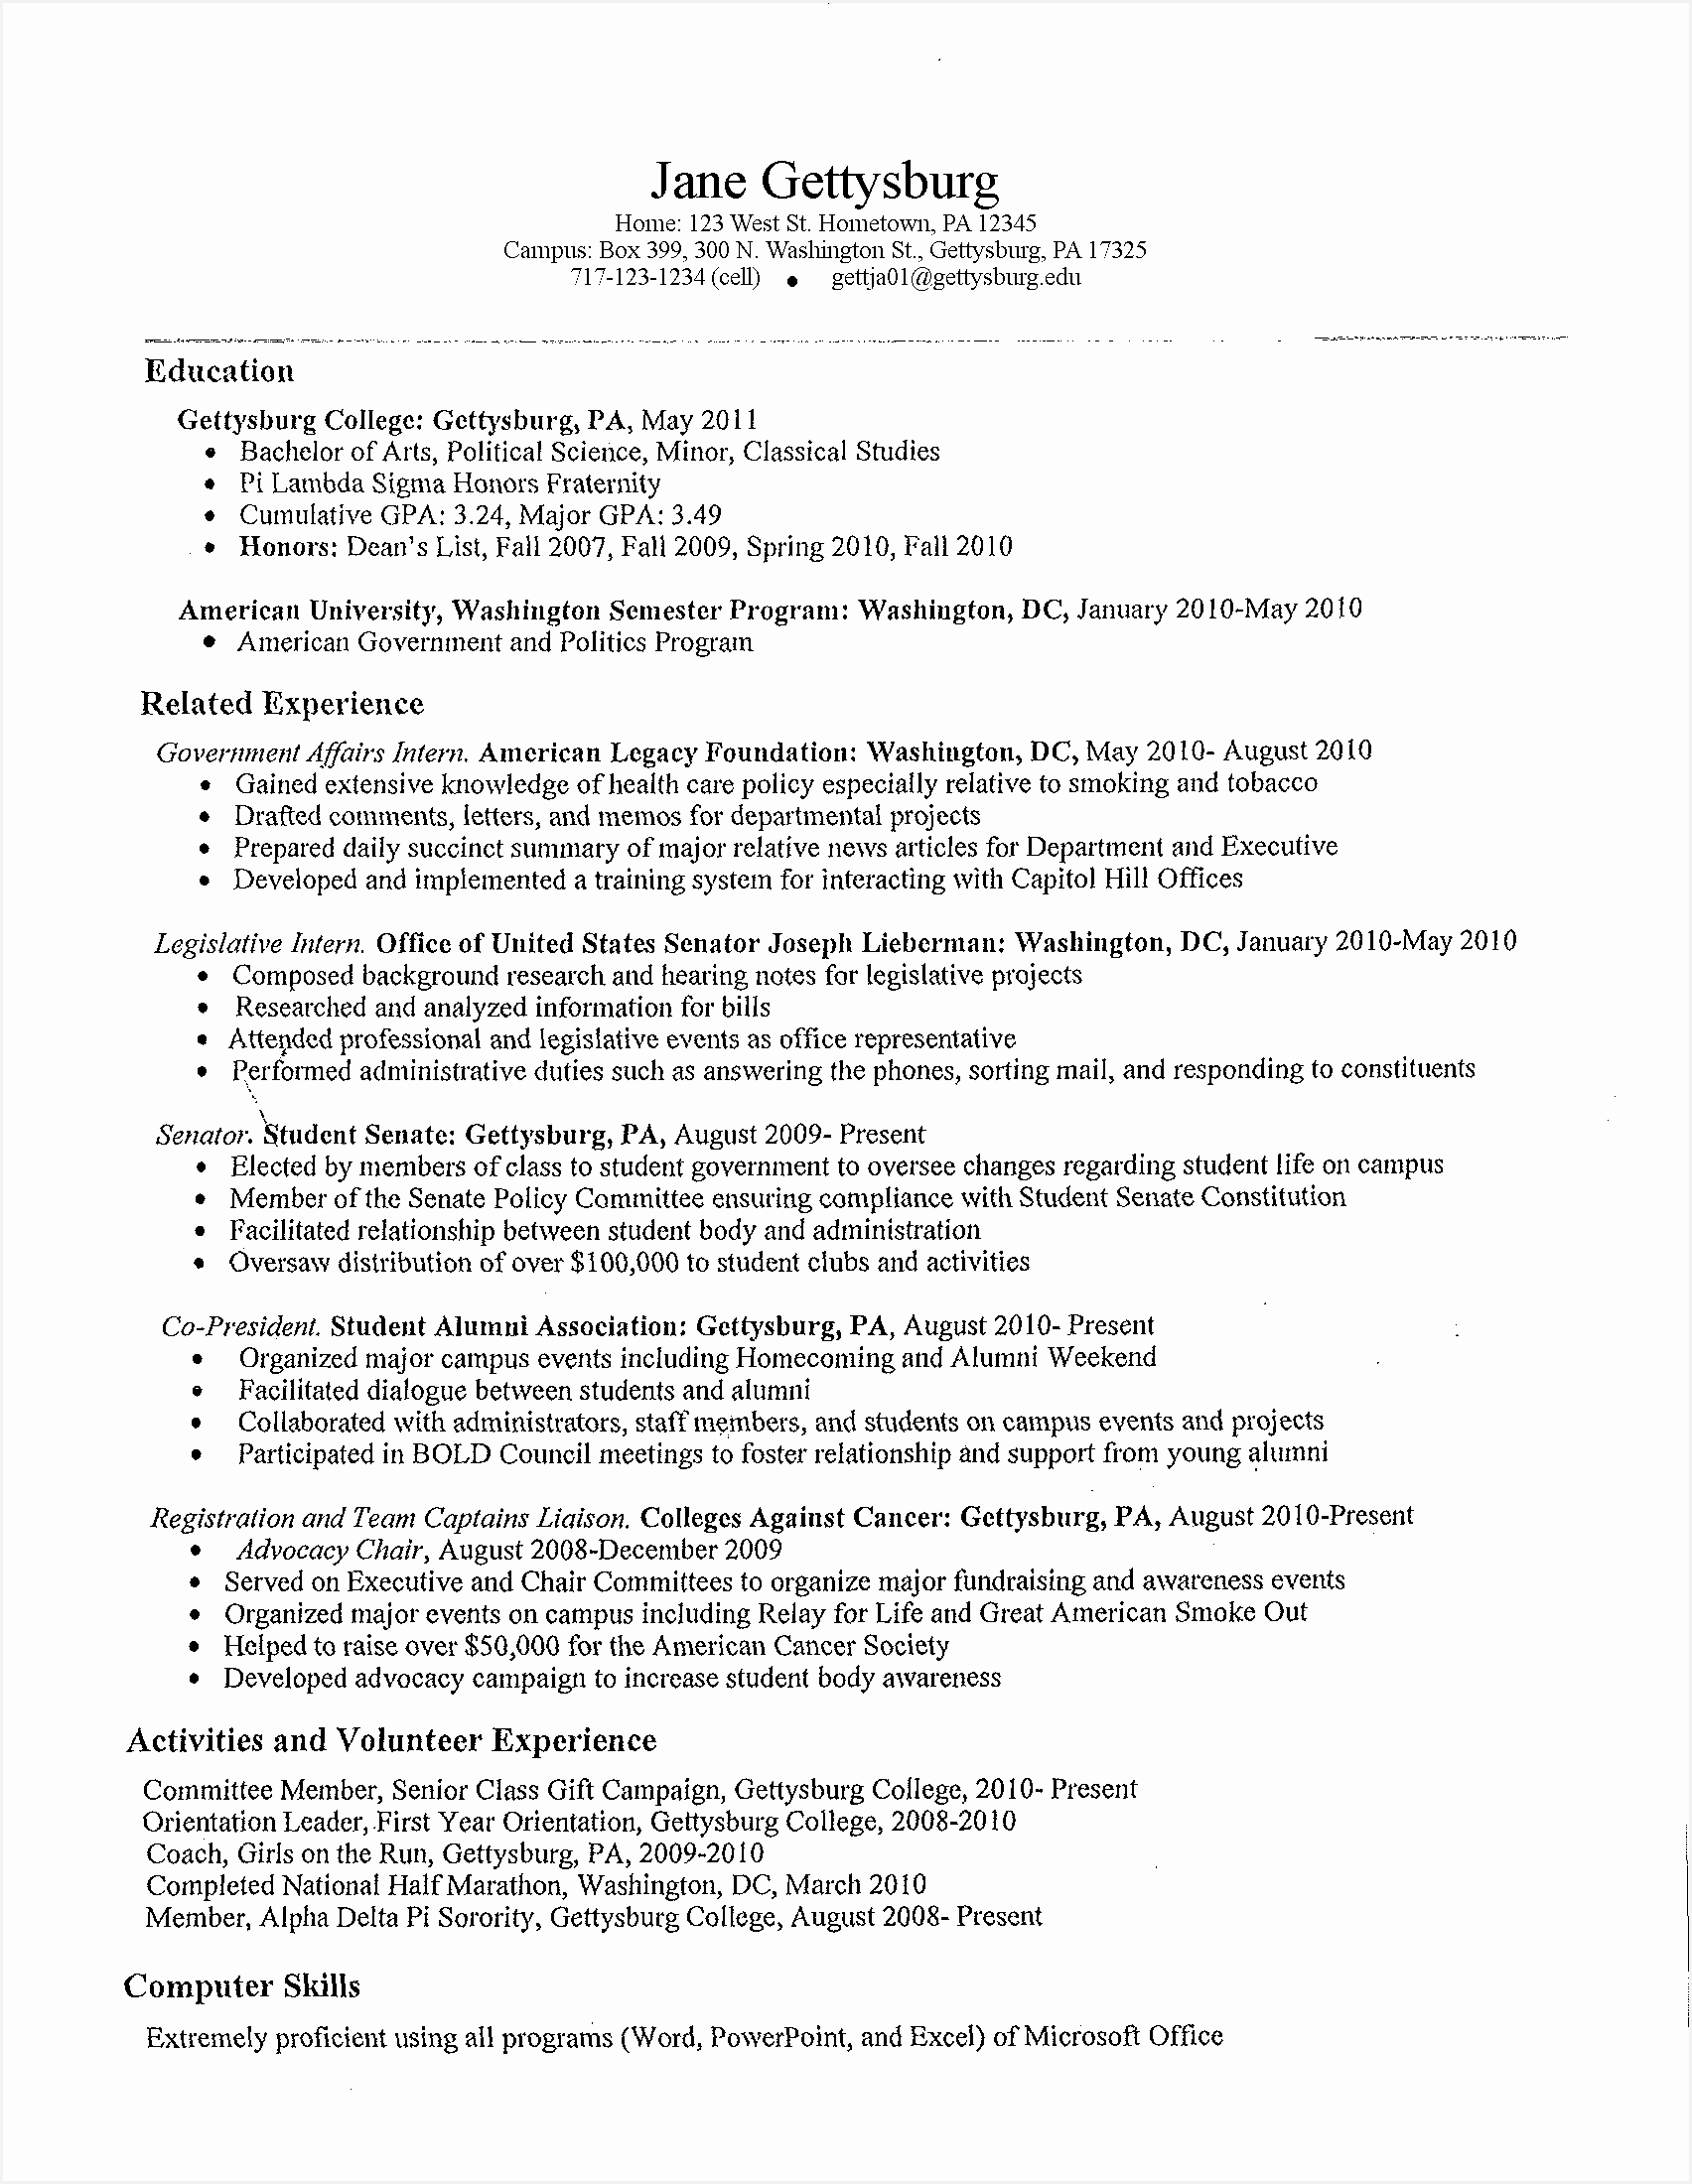 Inspirational Resume for Highschool Students Excellent Resumes 0d It Resume Template Inspirational Resume for Highschool22001704